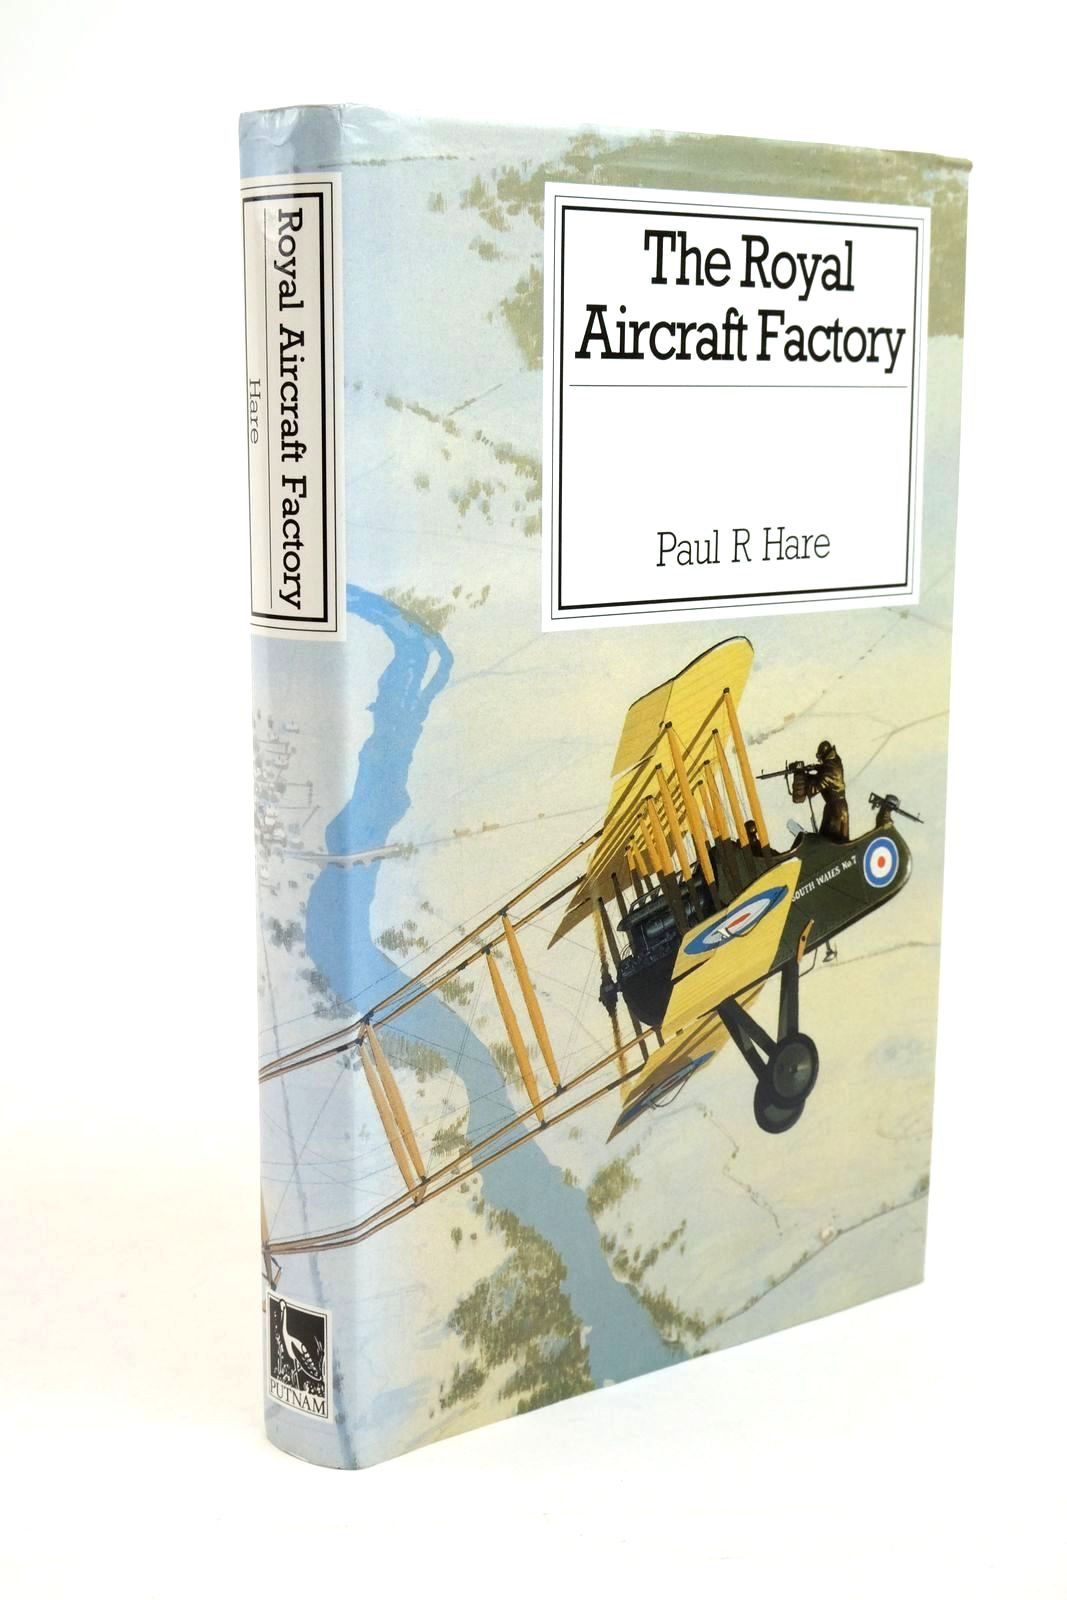 Photo of THE ROYAL AIRCRAFT FACTORY written by Hare, Paul R. published by Putnam (STOCK CODE: 1322020)  for sale by Stella & Rose's Books